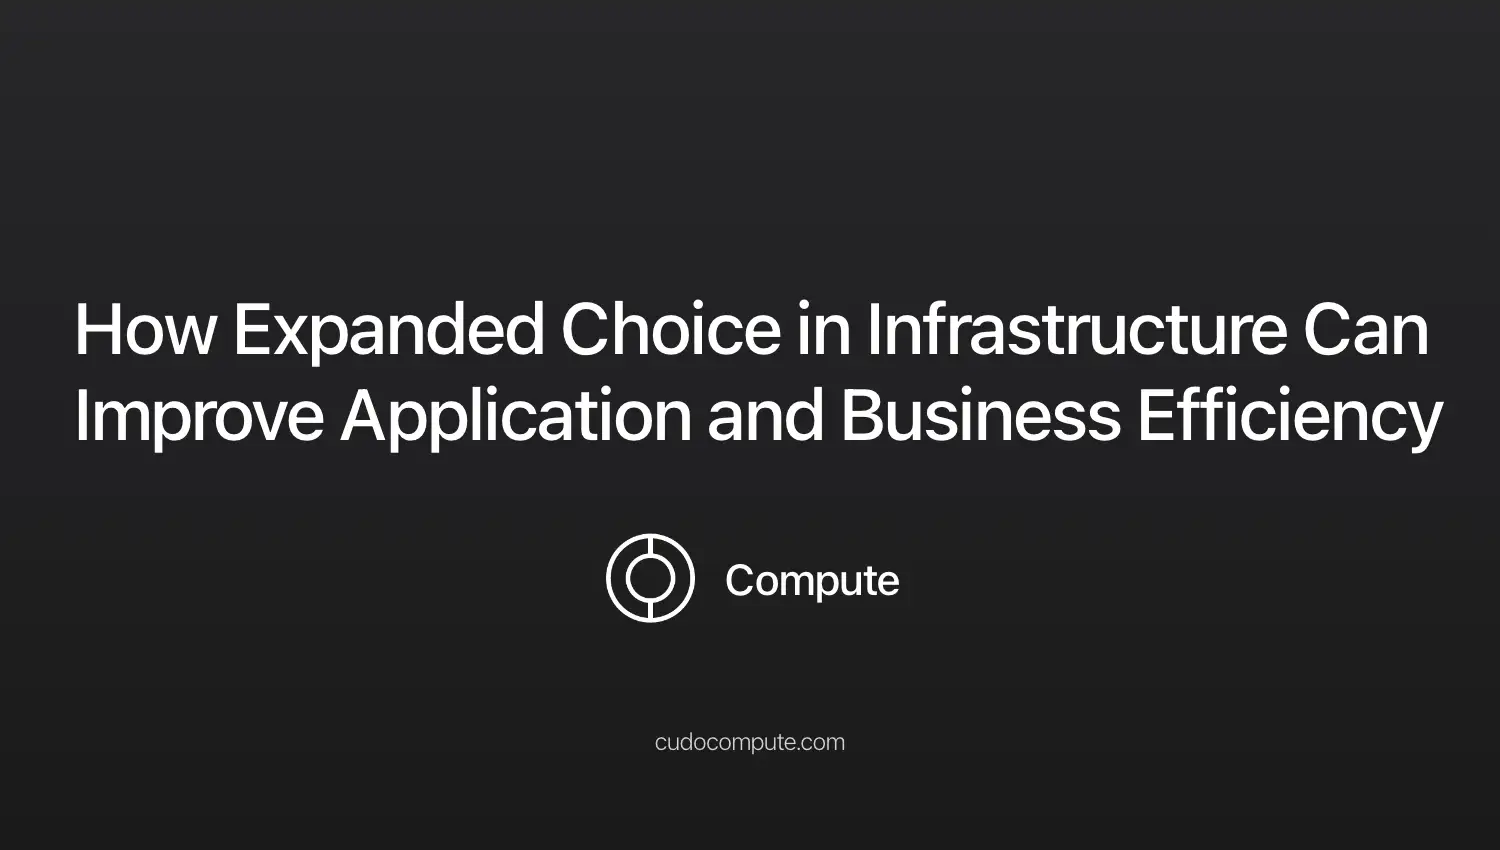 How expanded choice in infrastructure can improve application and business efficiency cover photo